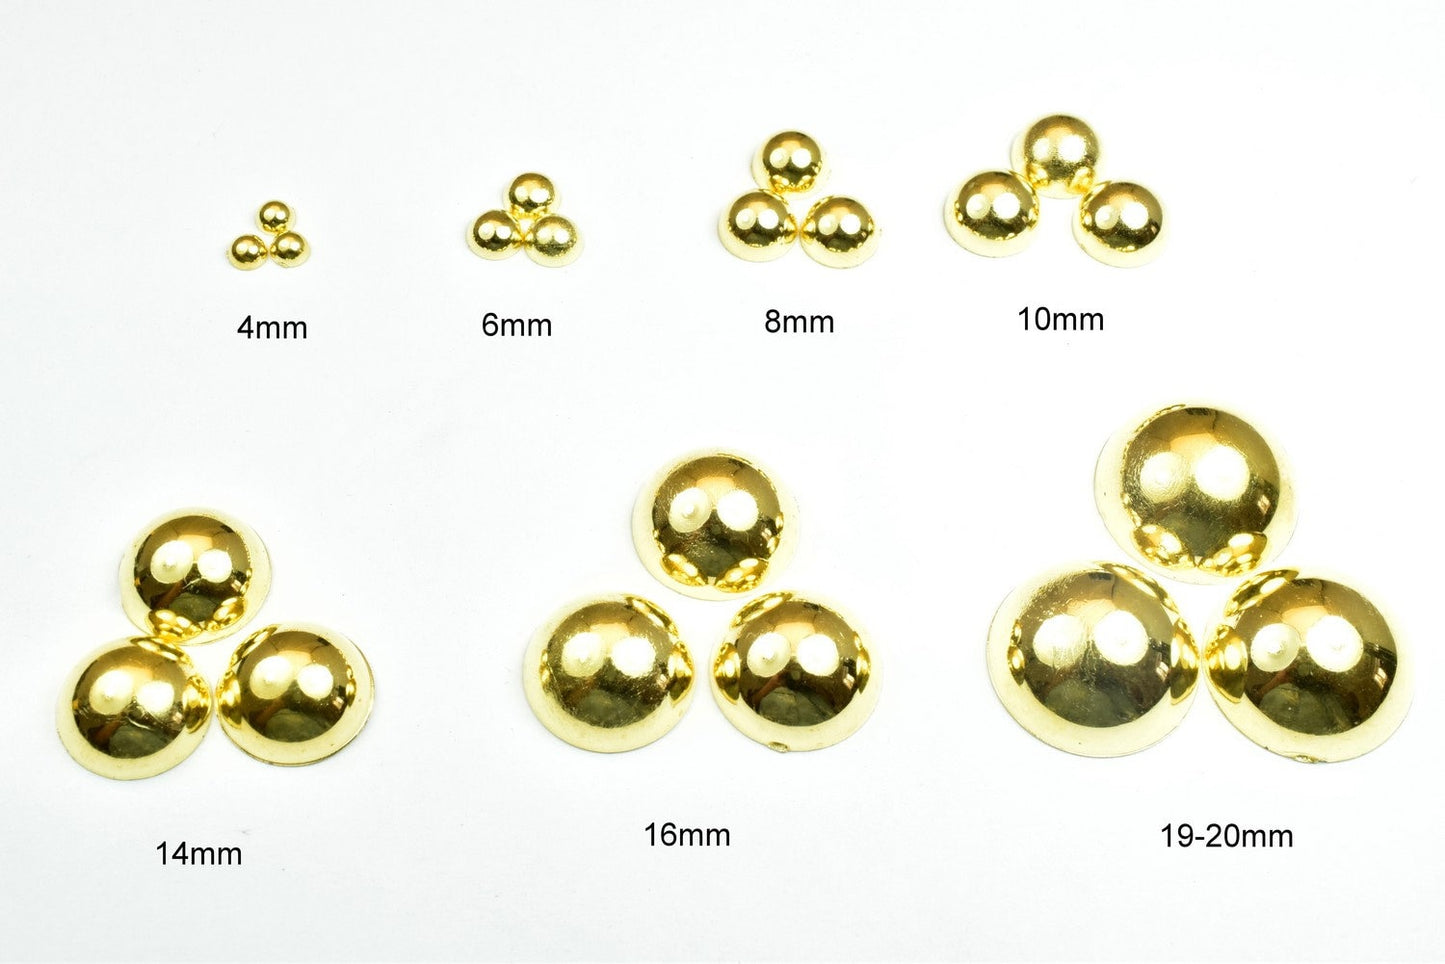 Decoden Flat Back Gold Pearls (Half Pearl) 4mm/6mm/8mm/10mm/14mm/16mm/19-20mm for Cloth or Shoe or Decoration or Jewelry Making